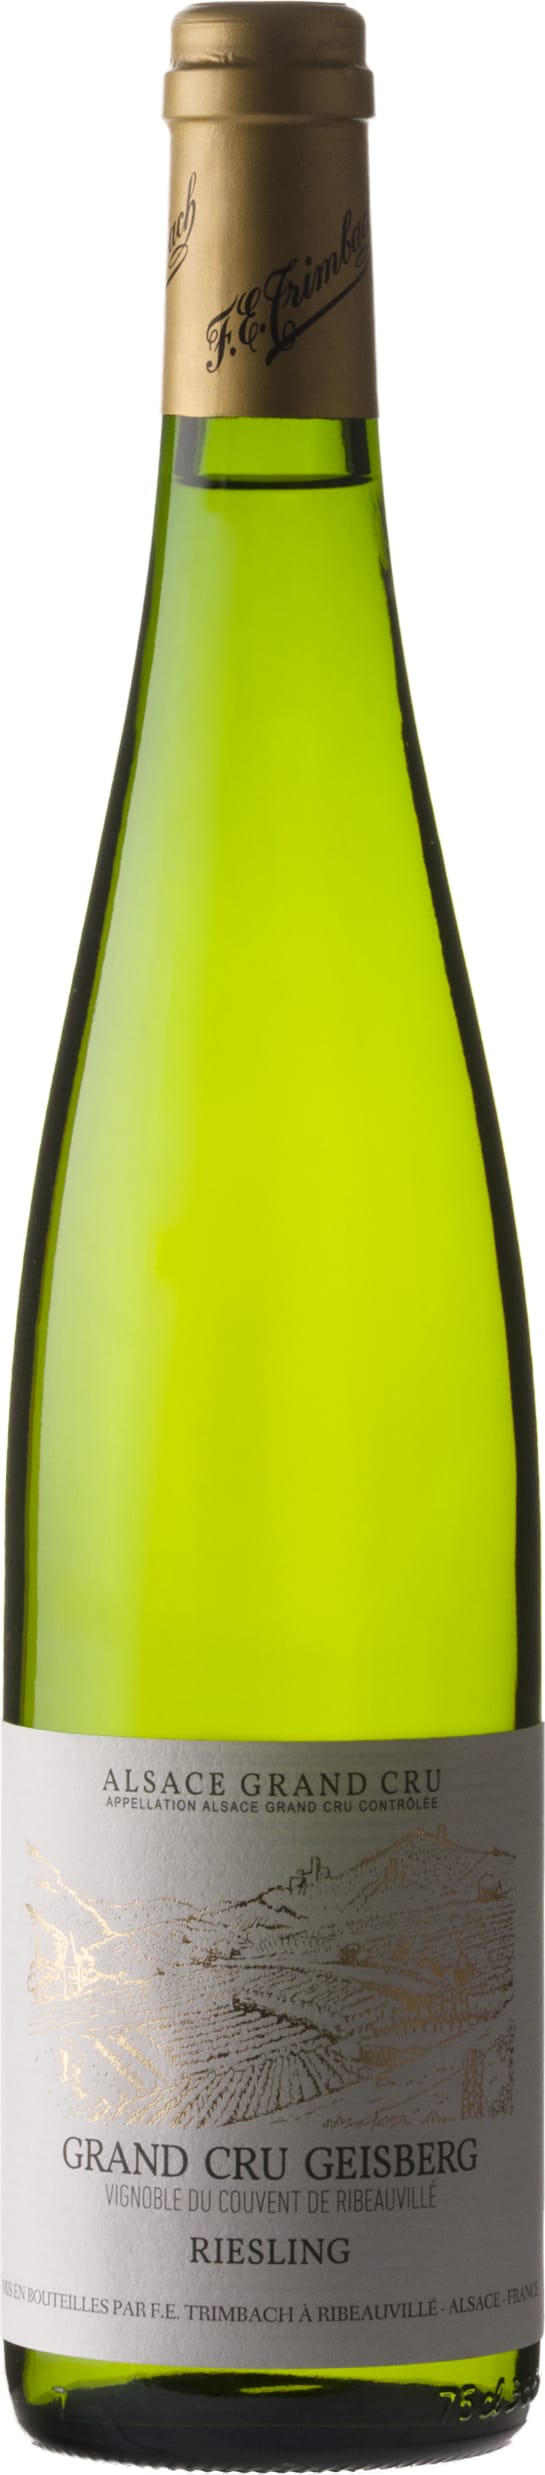 Trimbach Riesling Grand Cru Geisberg Magnum 2017 150cl - Buy Trimbach Wines from GREAT WINES DIRECT wine shop